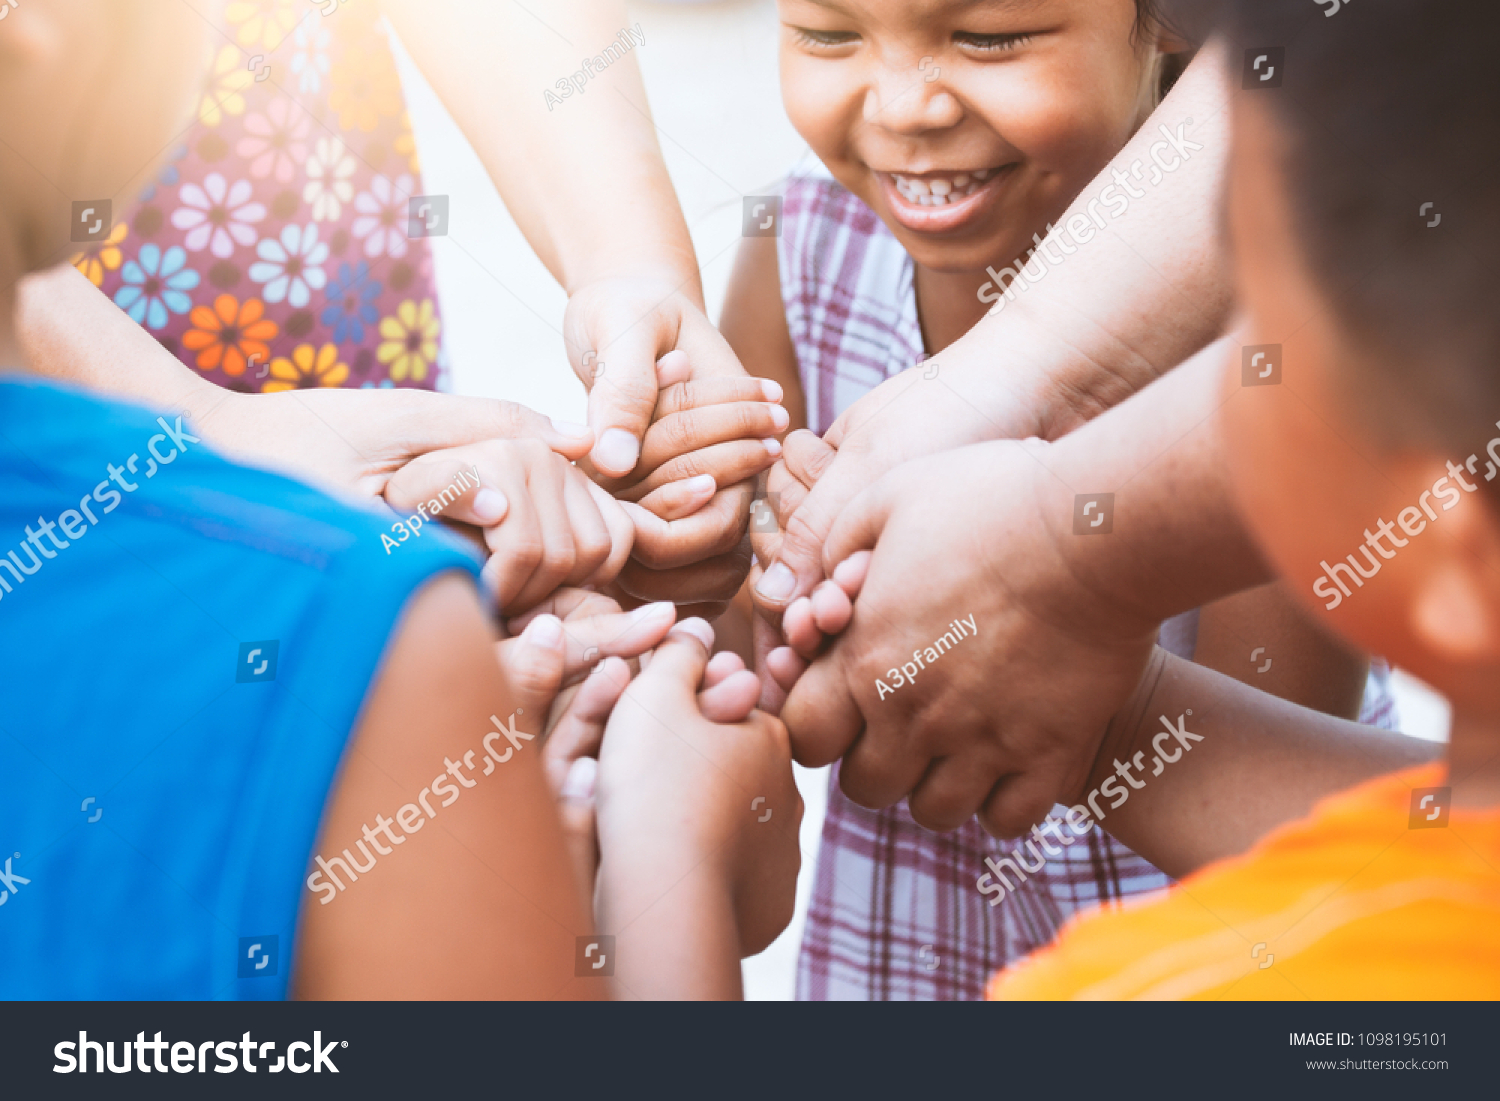 Children and parent holding hands and playing together with unity and teamwork #1098195101